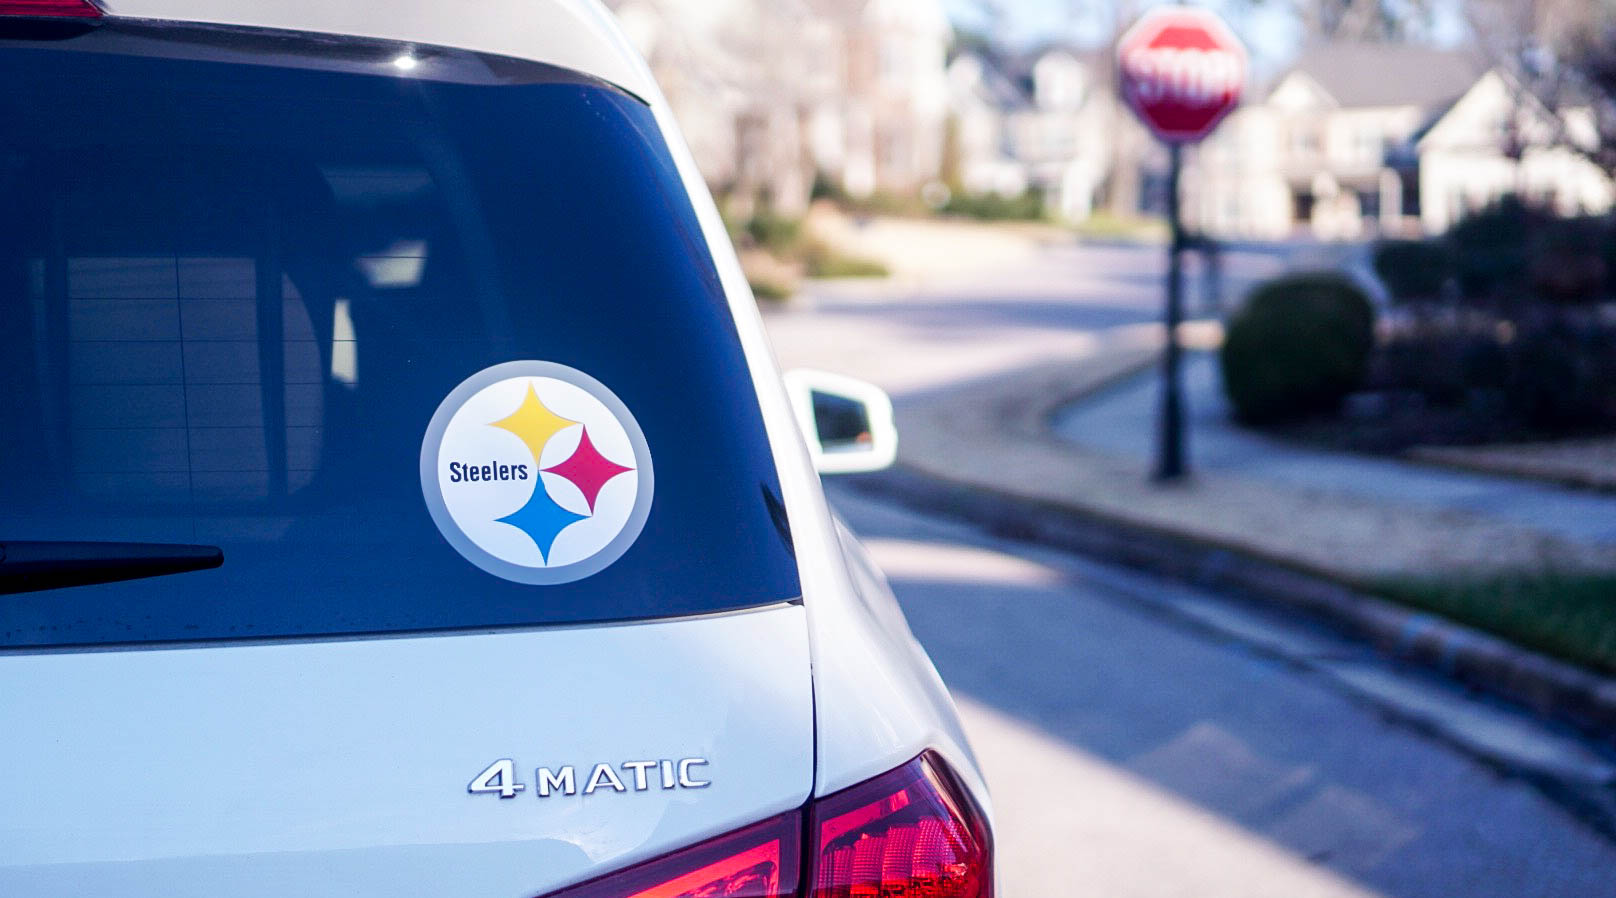 How To Make A Super Bowl Themed Car Decal With Adhesive Vinyl